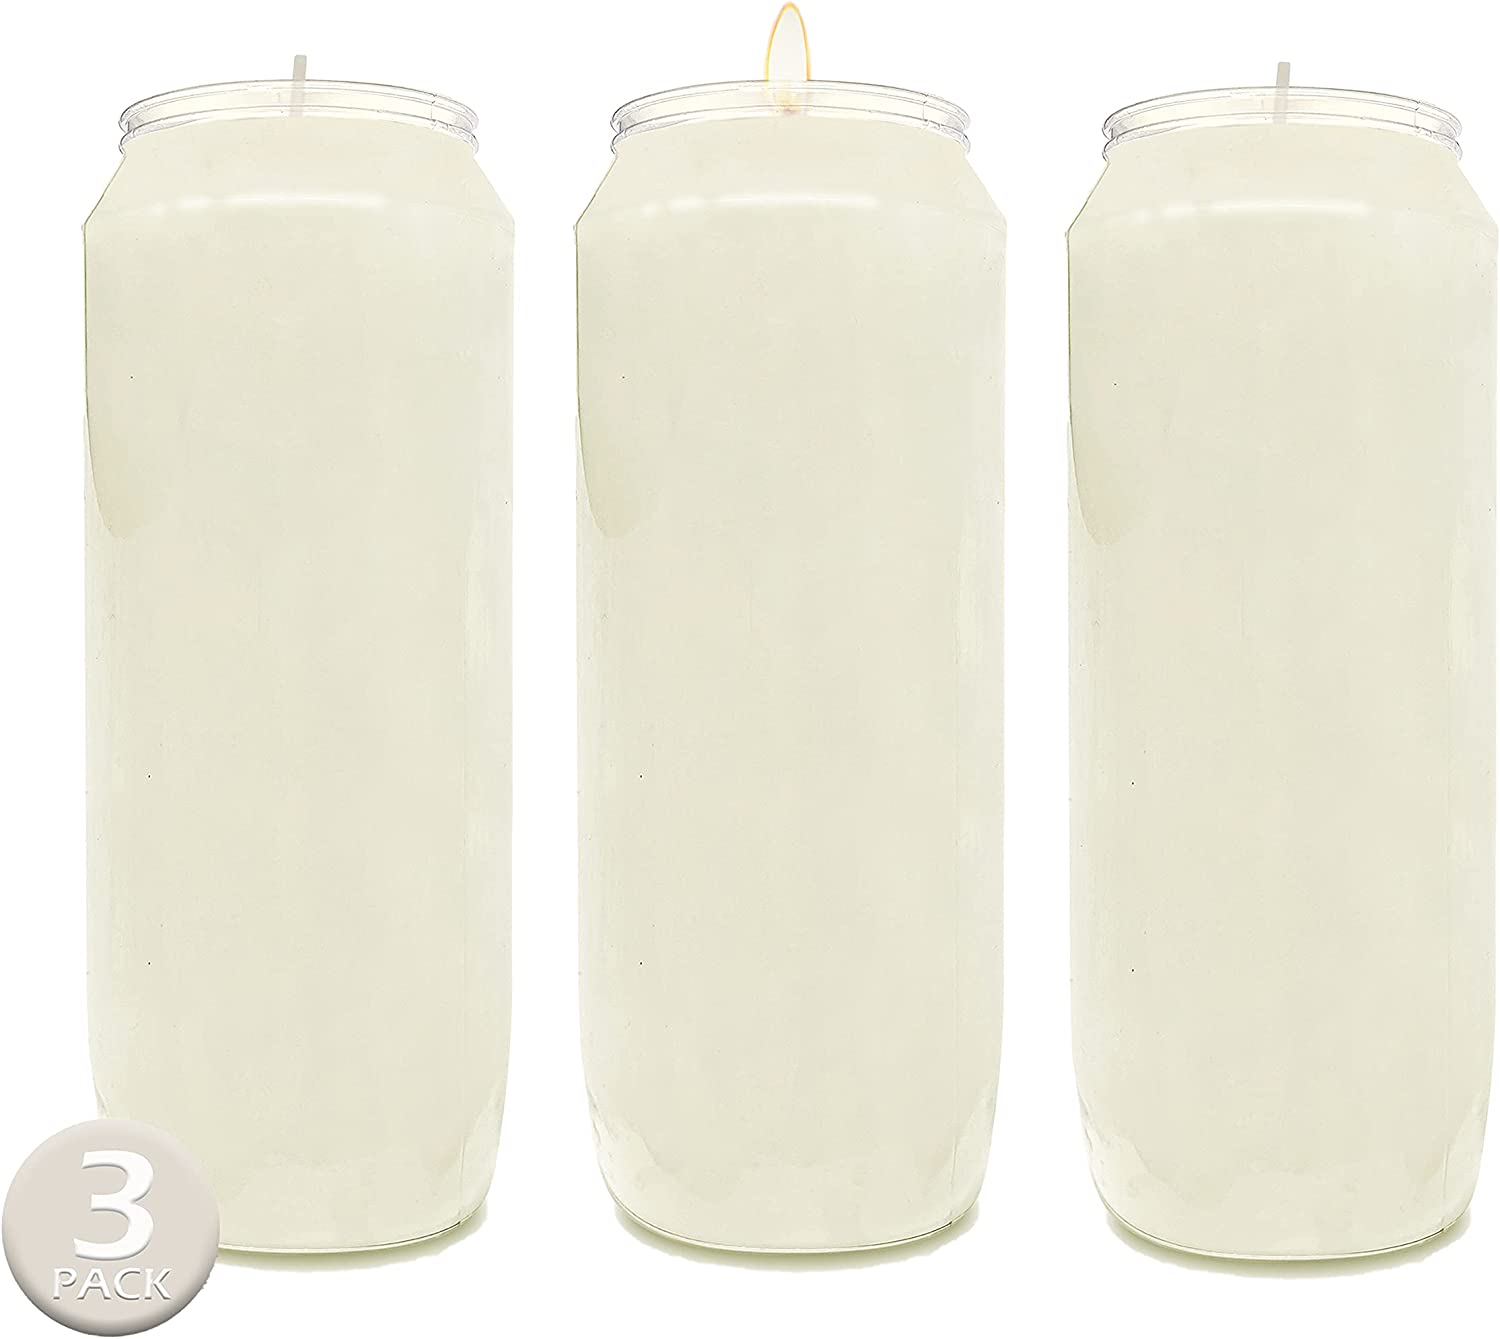 9 Day White Prayer Candles, 3 Pack – 7" Tall Pillar Candles for Religious, Memorial, Party Decor, Vigil and Emergency Use – Vegetable Oil Wax in Plastic Jar Container – by Hyoola